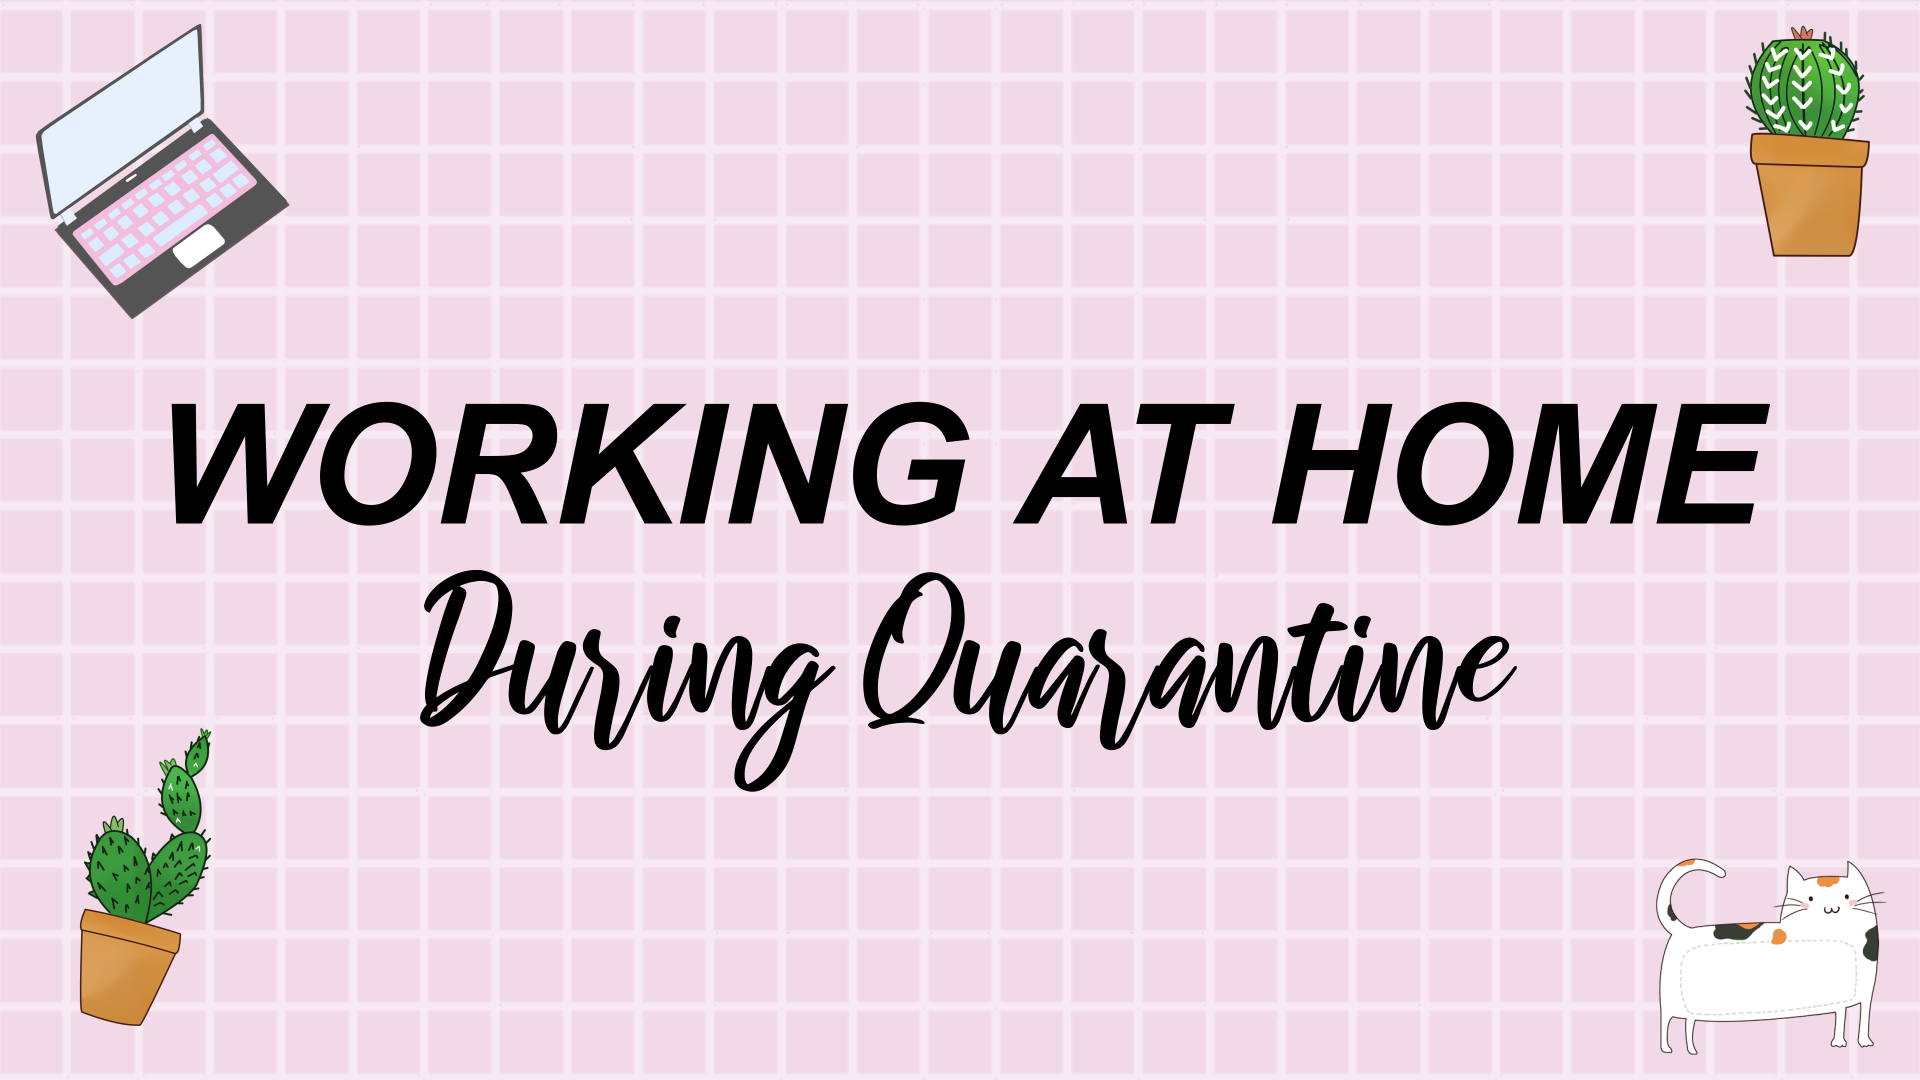 Working From Home During Quarantine | Tips from a Freelance Video Editor